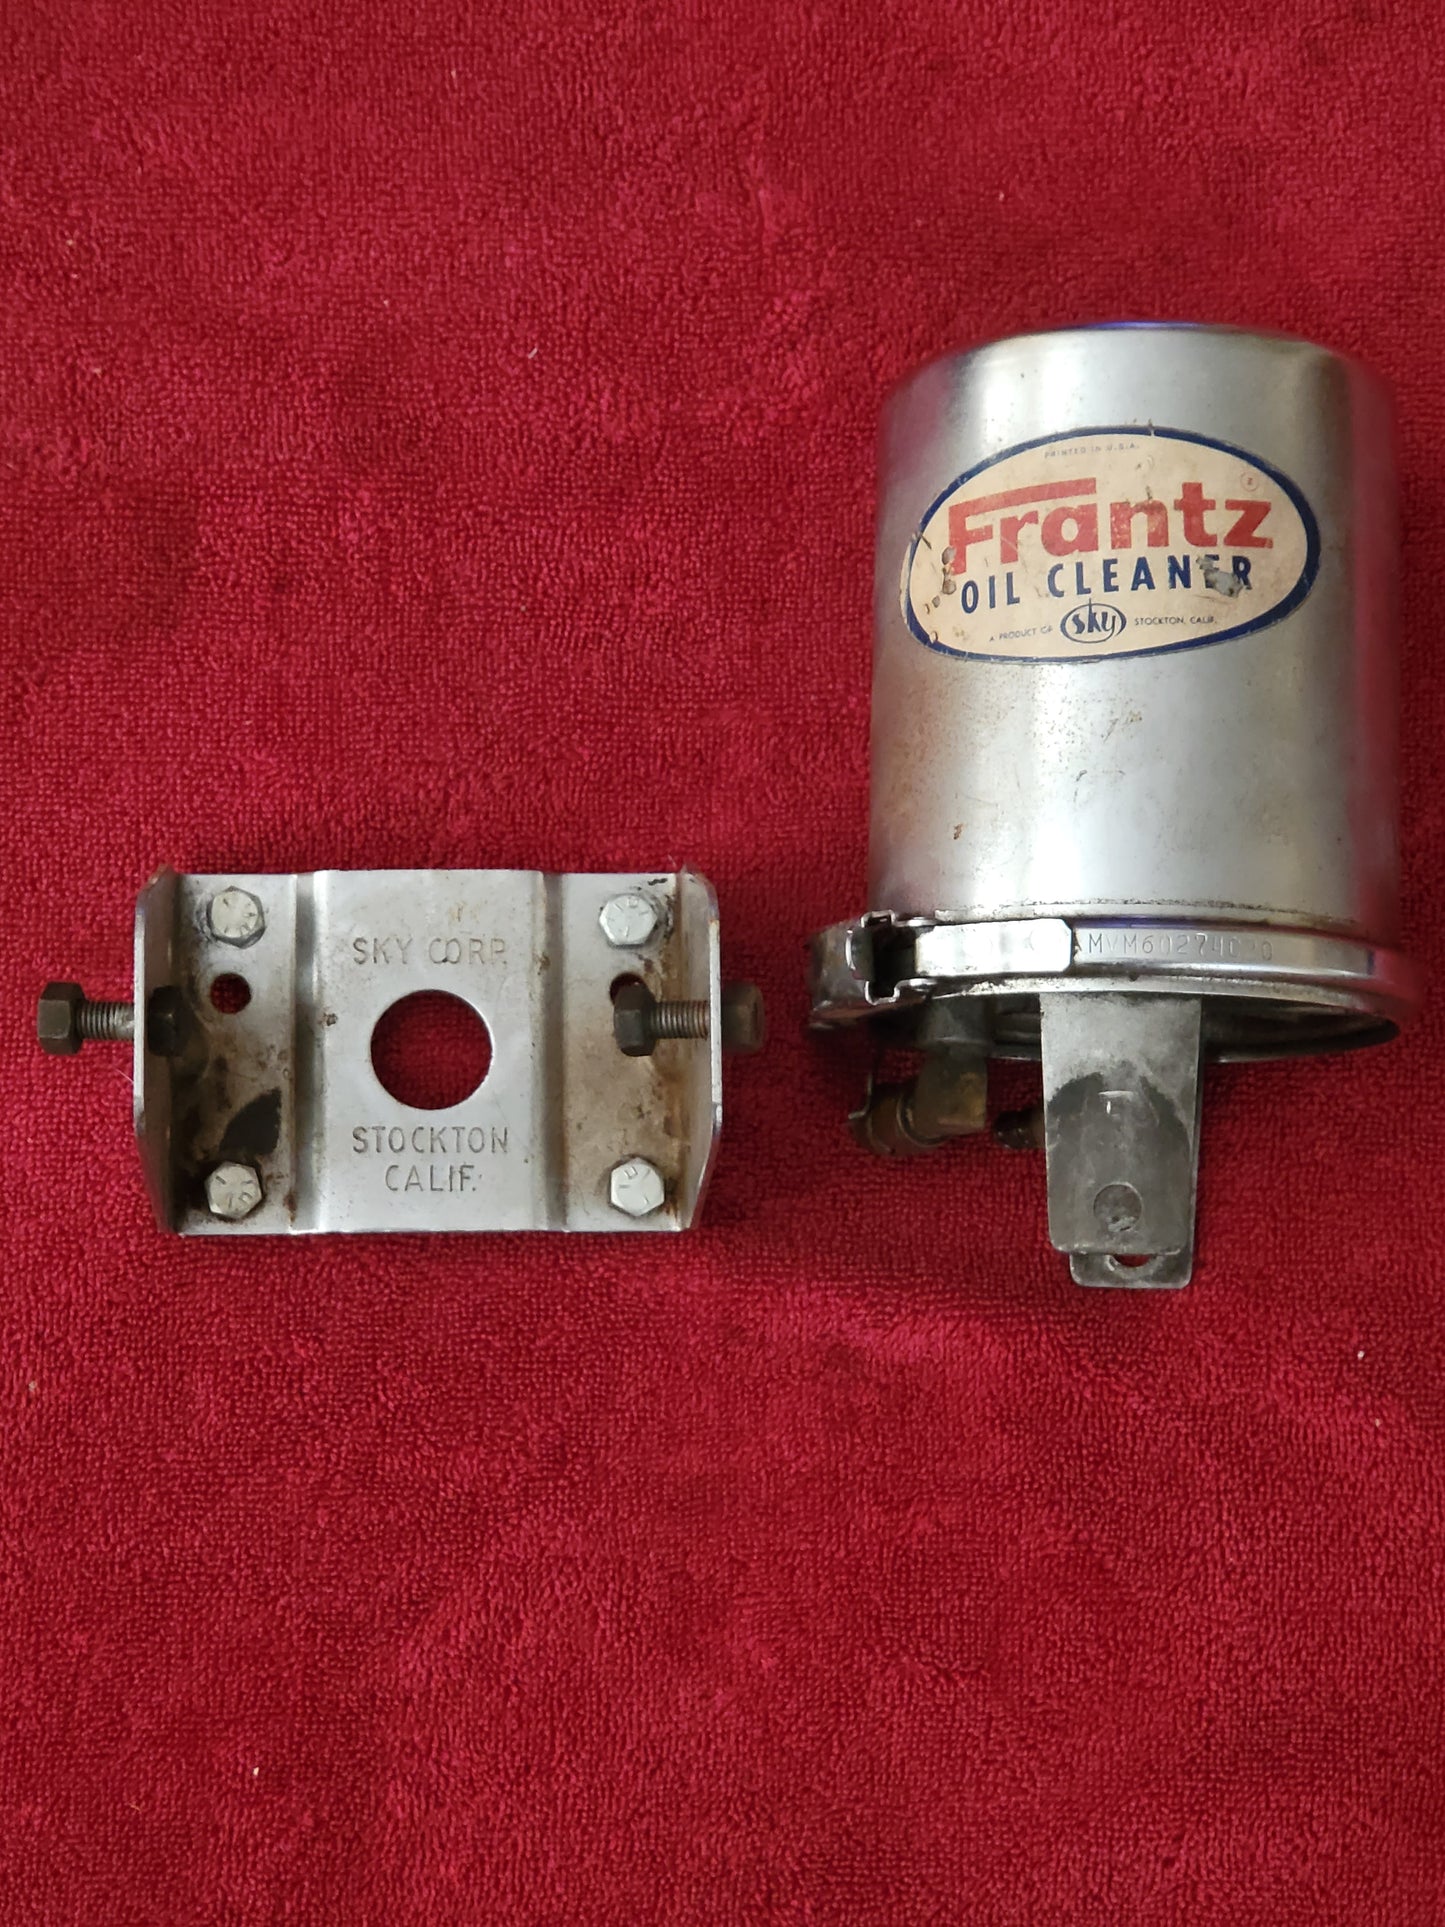 Vintage Sky Corp Frantz Oil Filter Cleaner with Mounting Bracket Used 2